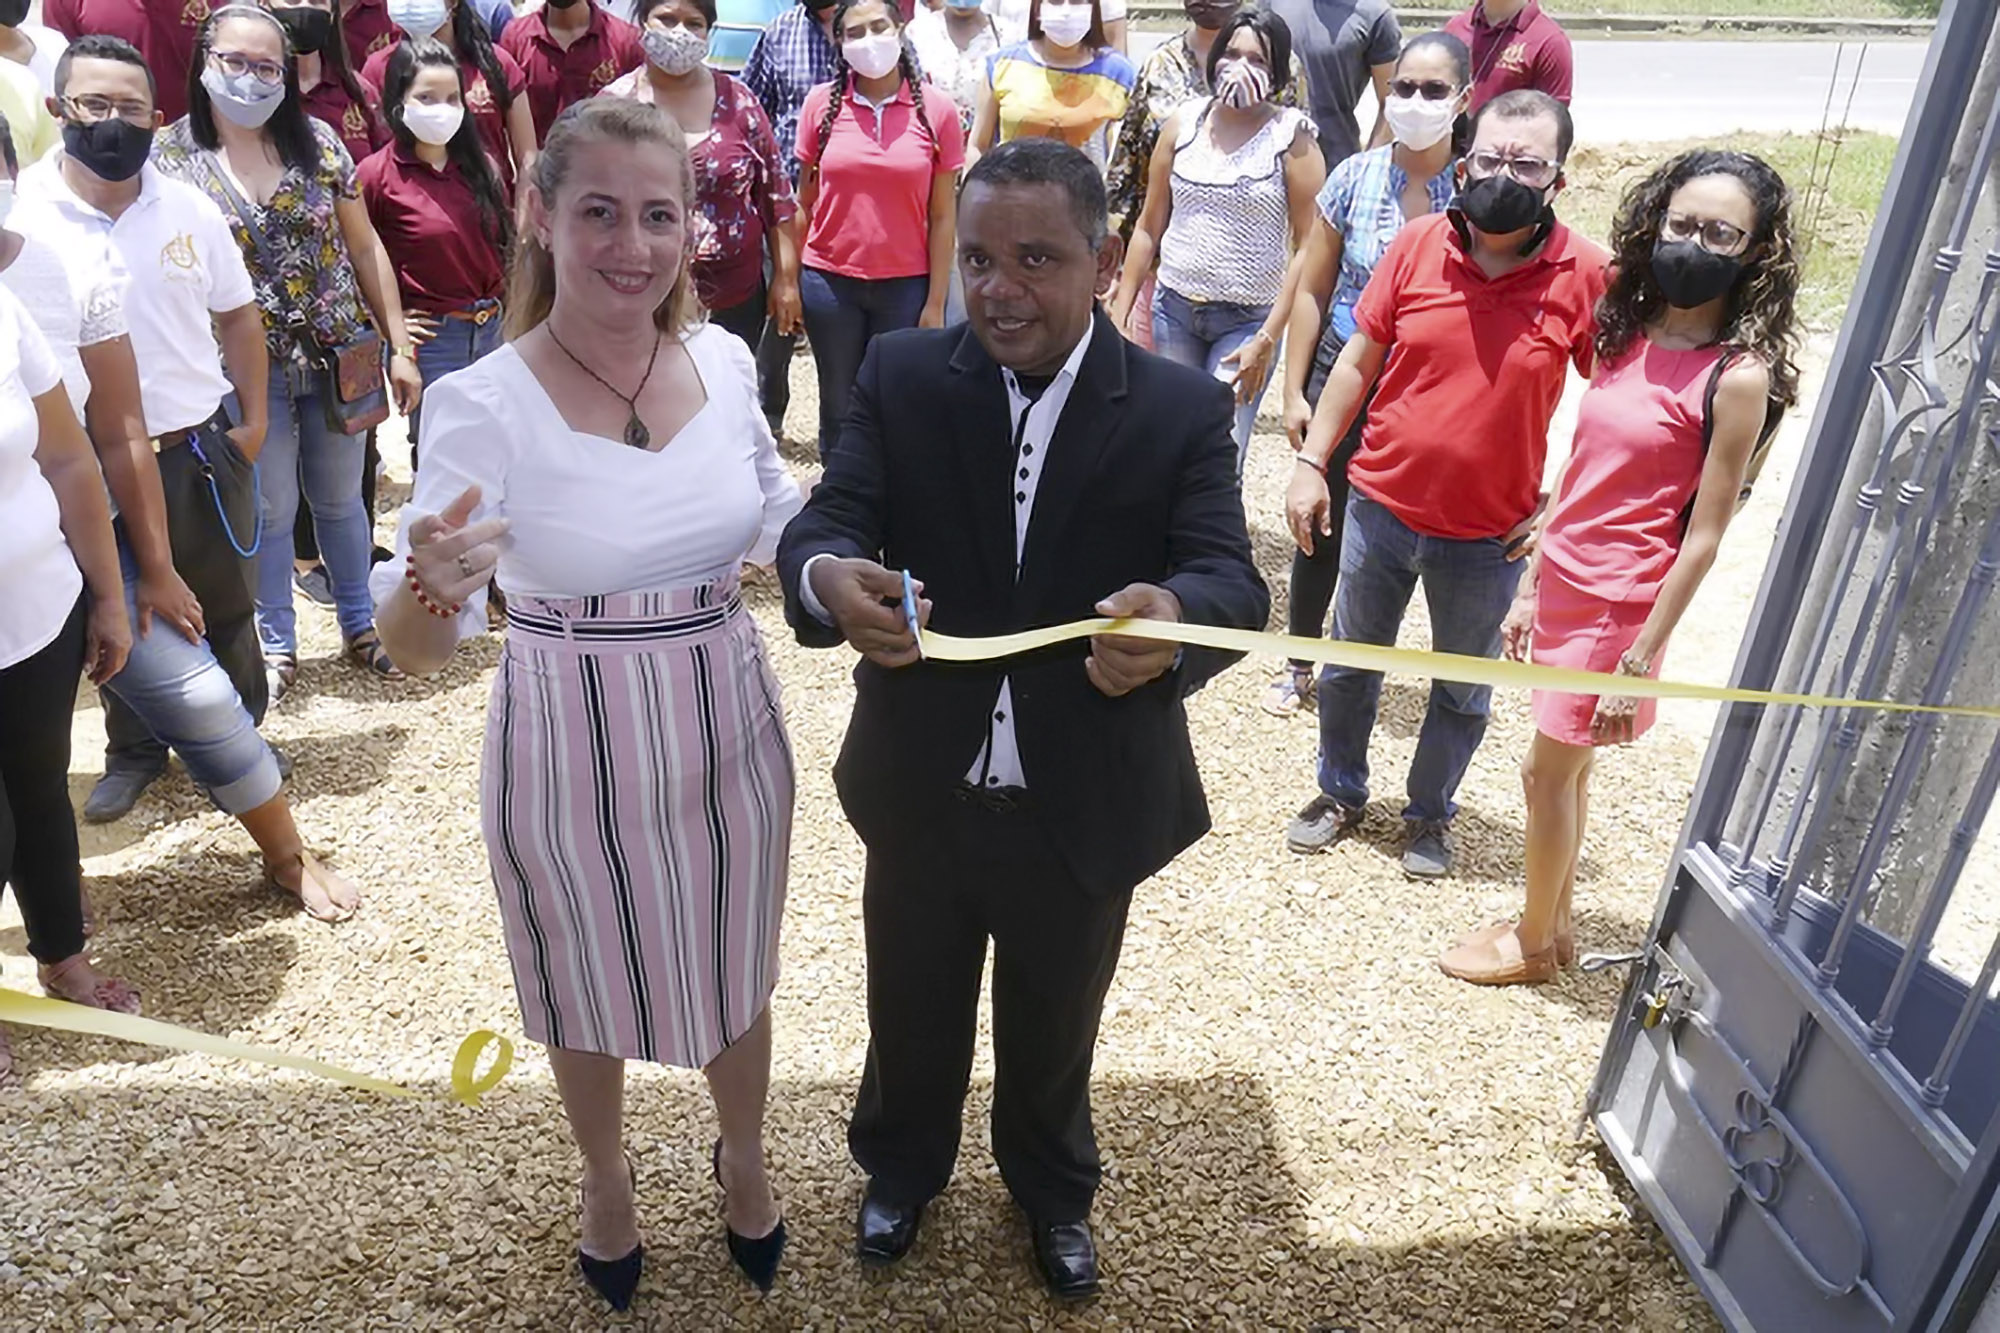 Cutting ribbon ceremony at a church in Colombia